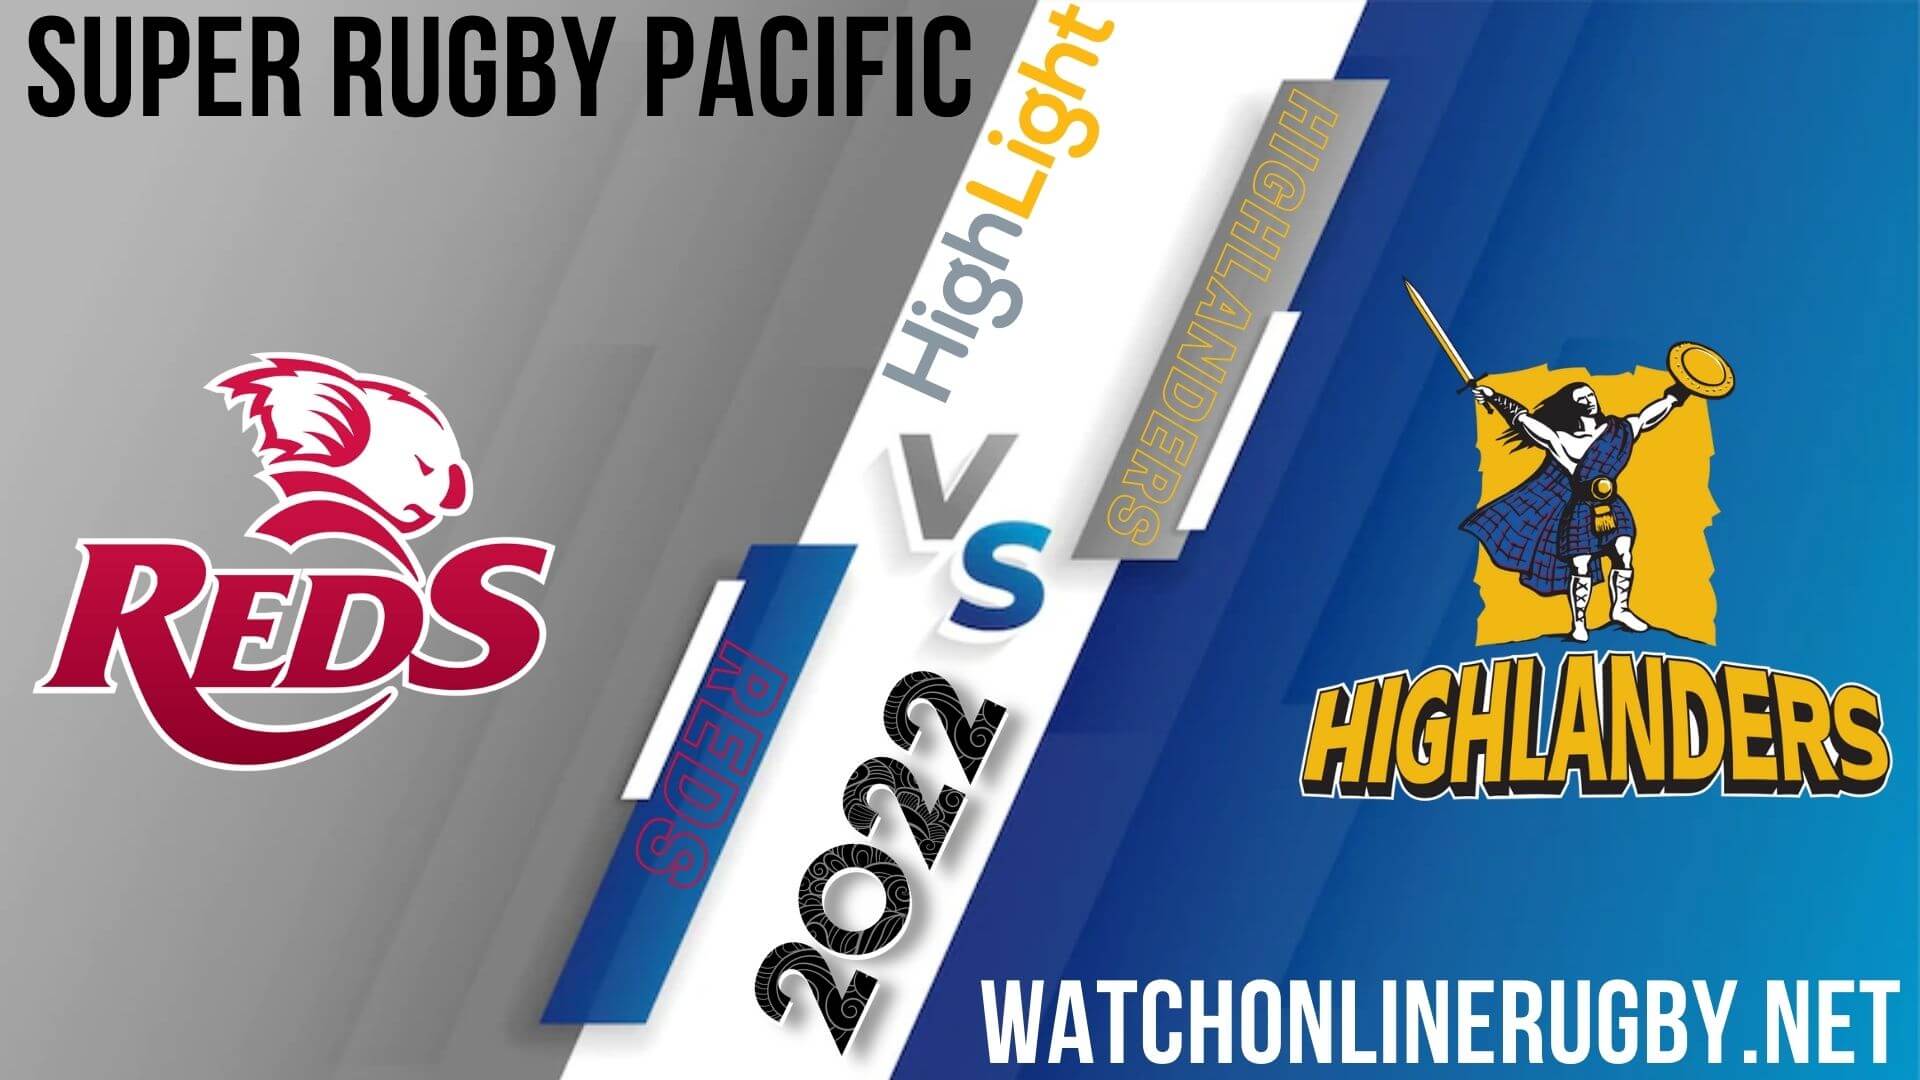 Reds Vs Highlanders Super Rugby Pacific 2022 RD 12